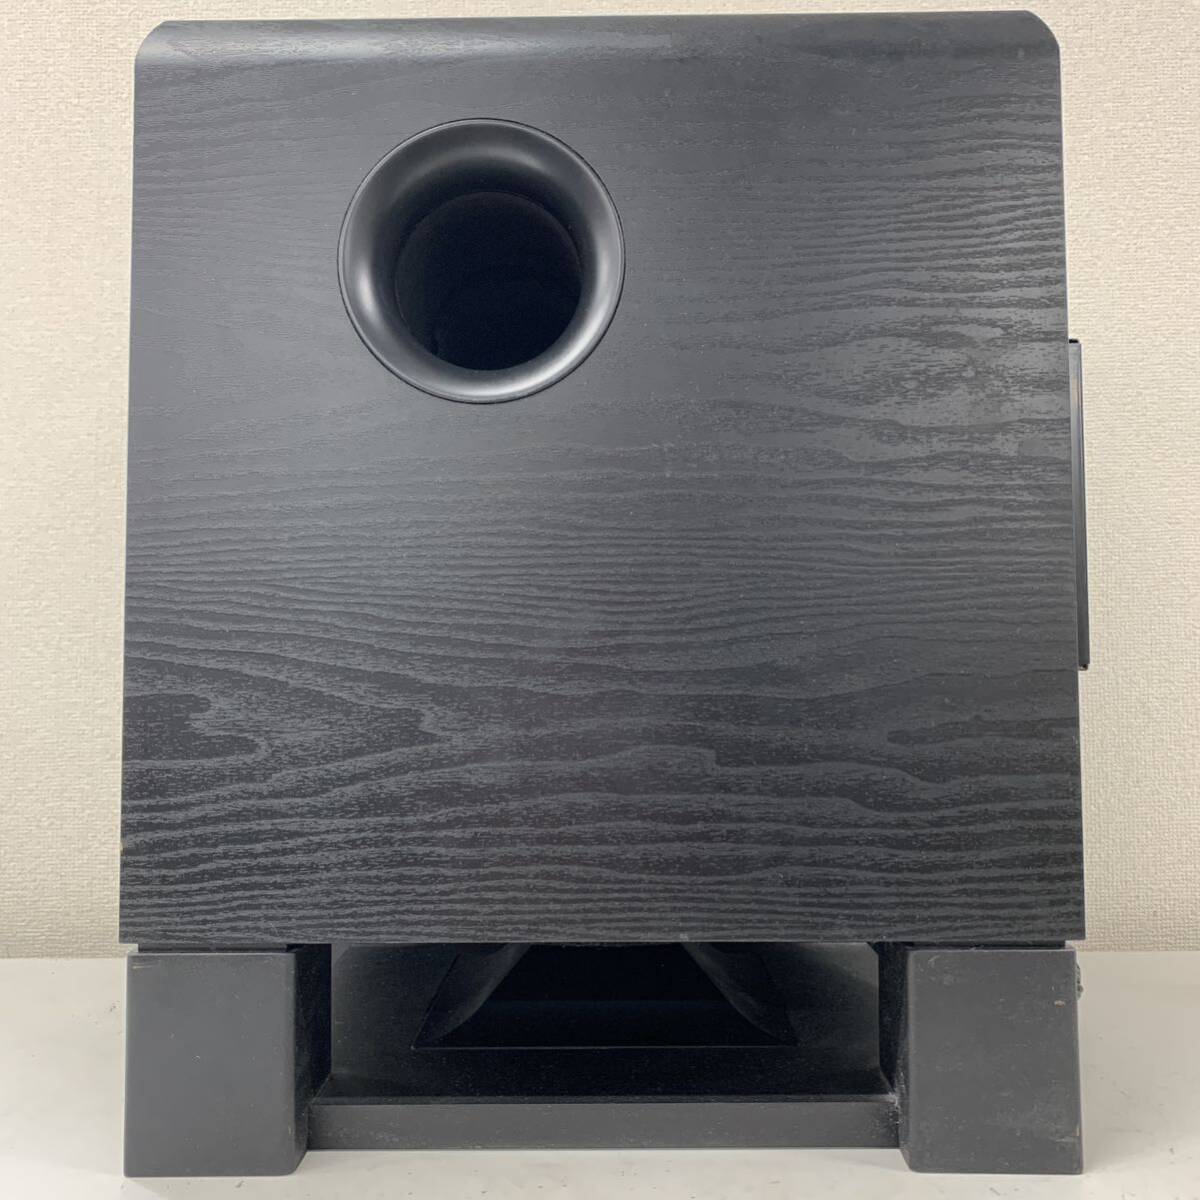 [Id-3] YAMAHA YST-SW800 SUPERWOOFER SYSTEM subwoofer Yamaha sound out has confirmed small use impression equipped 1599-93